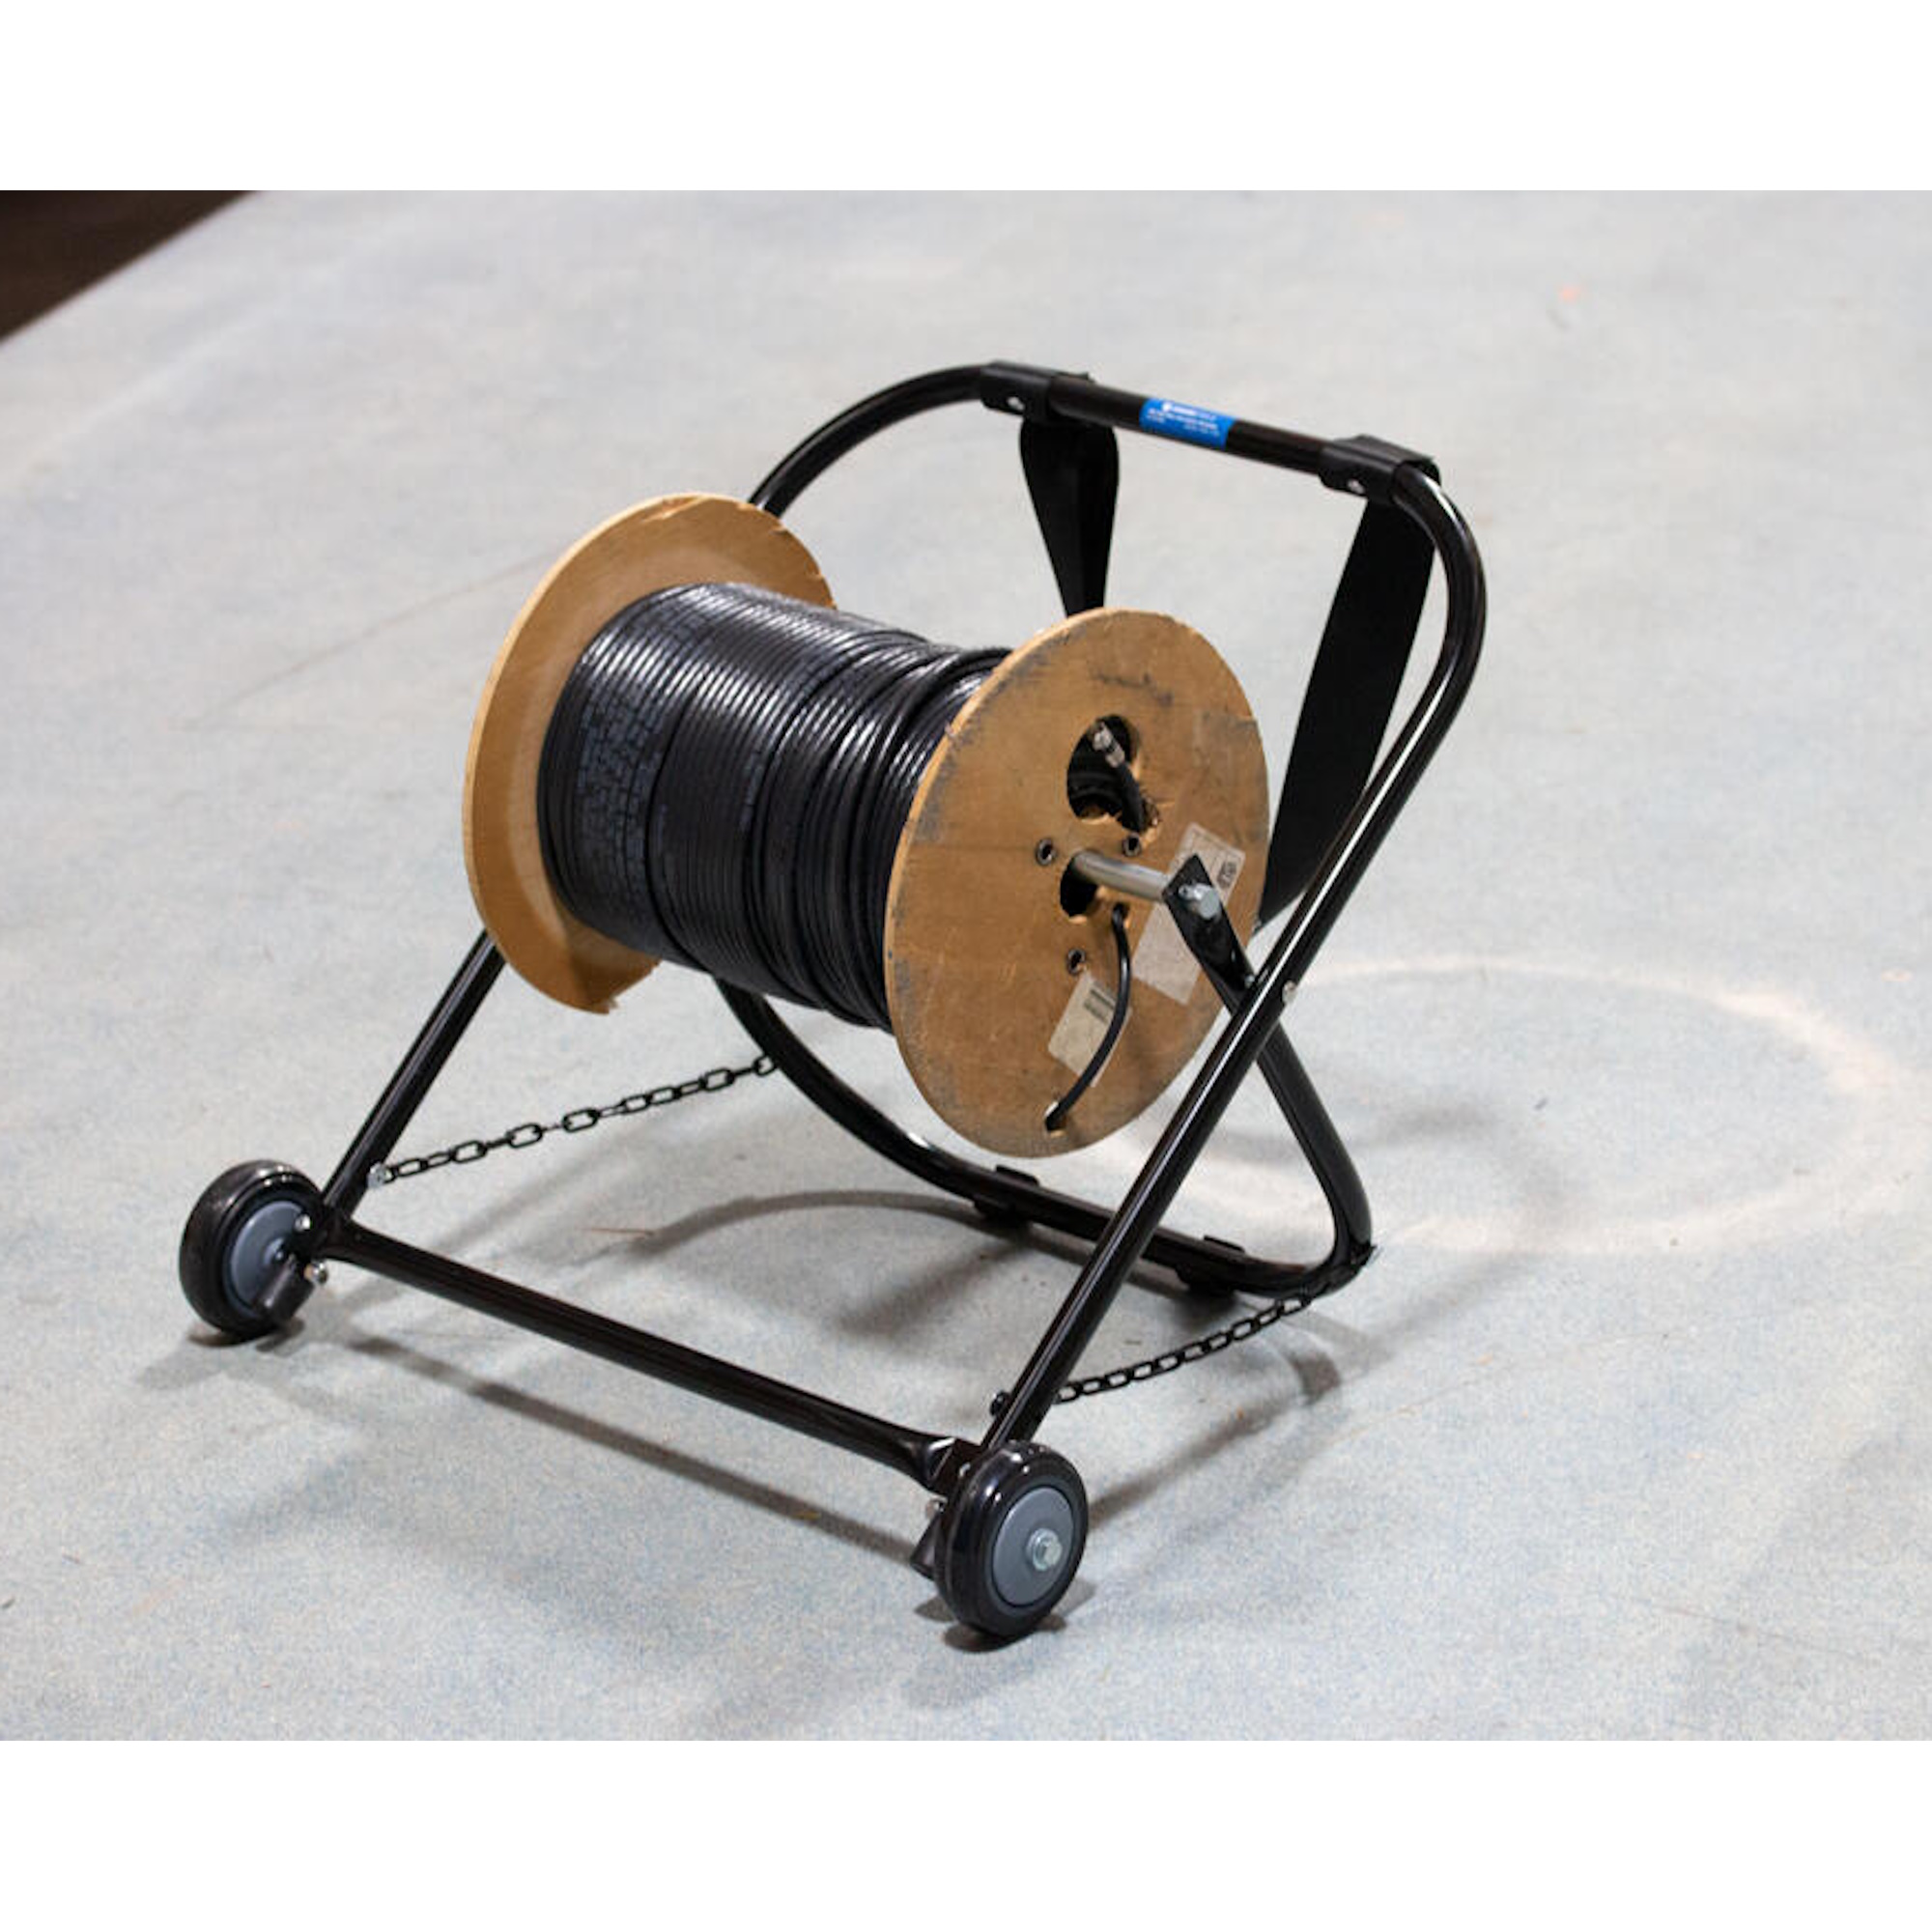 https://www.engineersupply.com/Images/Jonard-Tools/ET16601-Jonard-Tools-Steel-Cable-Caddy-with-Wheels-and-Pull-Strap-21-Inch-Wide-CC-2721WS-additional3.jpg